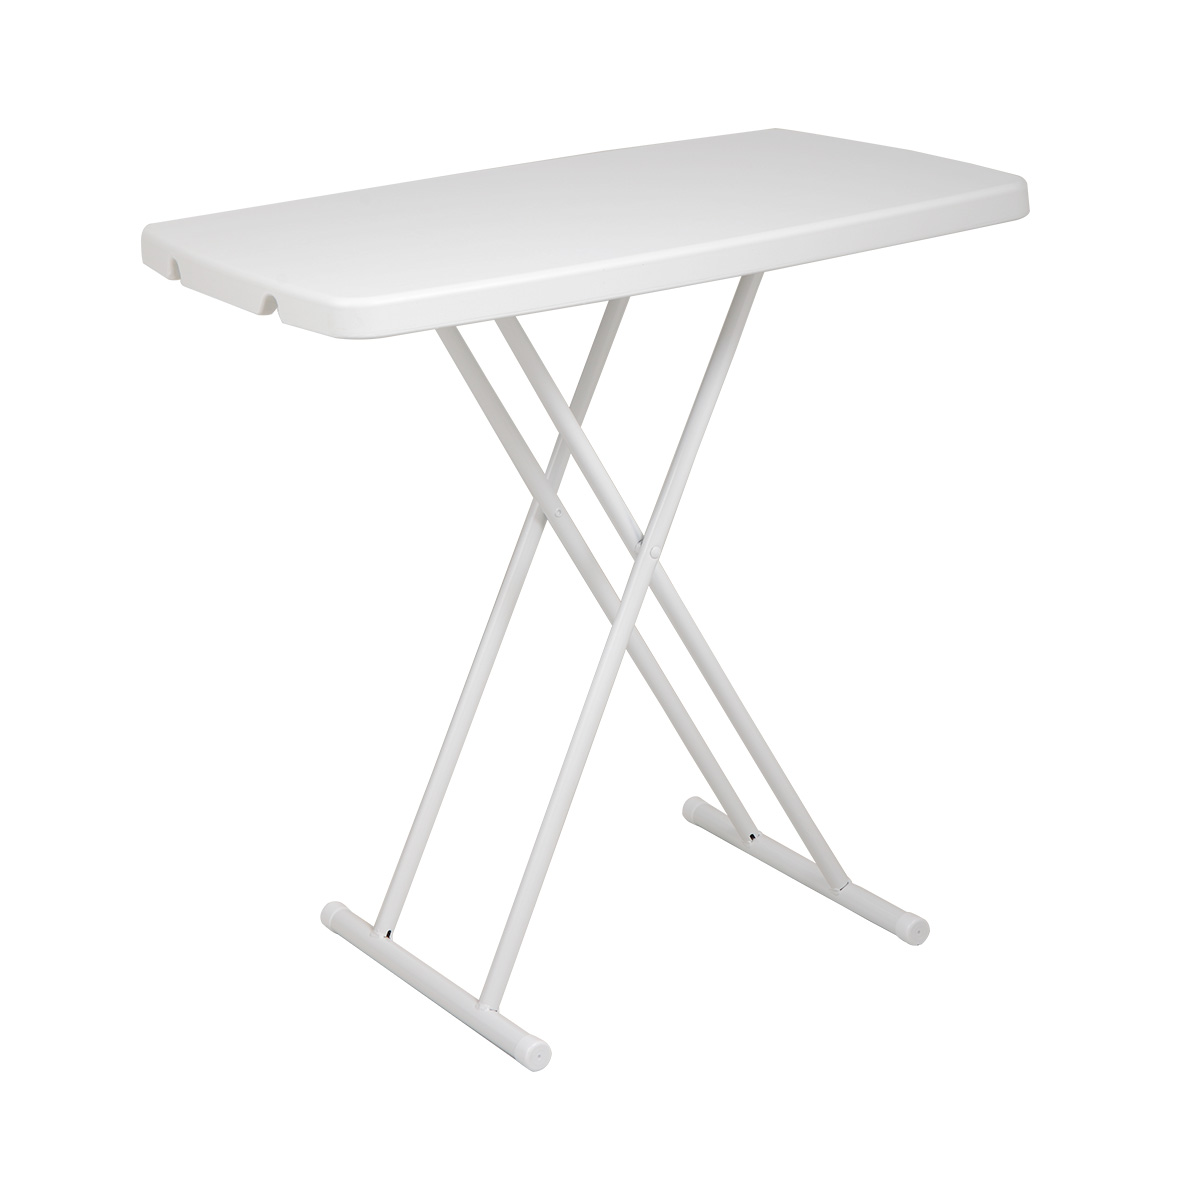 Folding Table Writing Desk with Adjustable Height for Study Office Home Use-Boyel Living